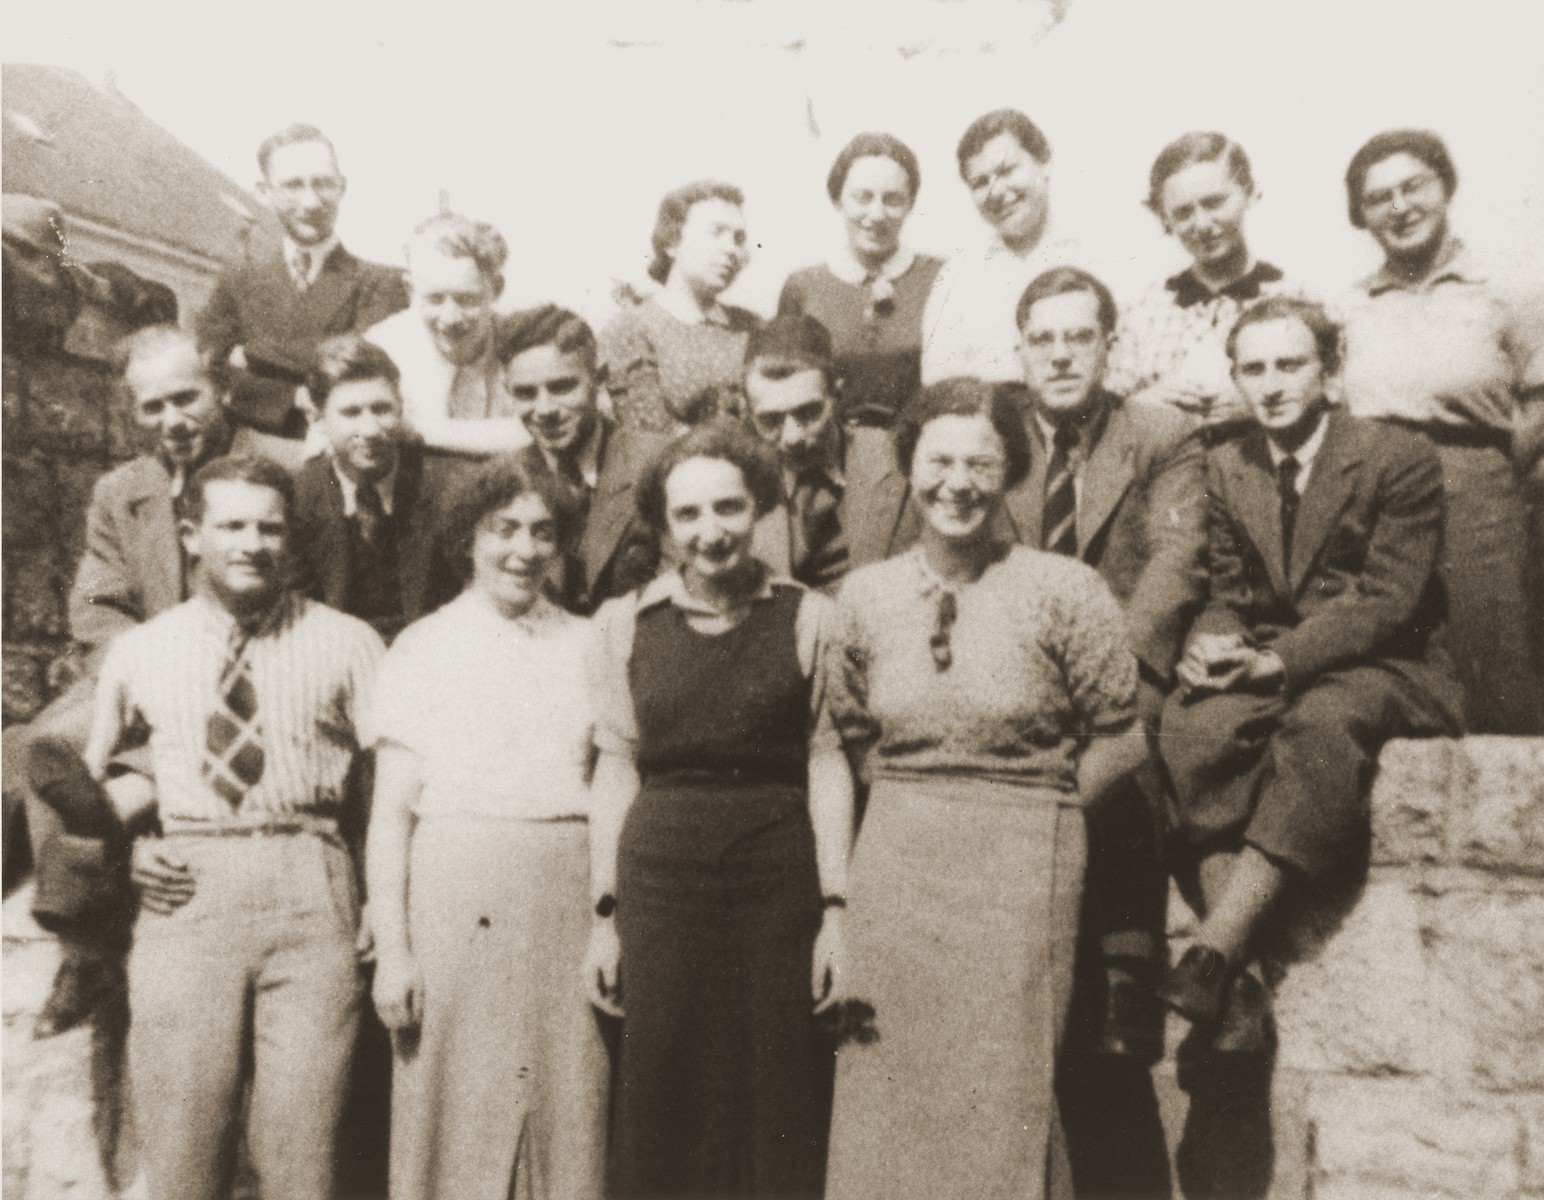 Graduating class of the Wuerzburg Jewish teachers seminary shortly before it was closed down on Kristallnacht.  

Pictured in the front row from left to right are Spier, unknown, Molly Haberman, and Toni Pachtmann.  In the middle row from left to right are, unknown, Herbert Aron, Albert Schild, Rabbi Naftali Carlebach, Jacob Breuer (son of the rabbi and Gerd Zwienicki.  In the top row, second from the right, is Kathe Weiss.